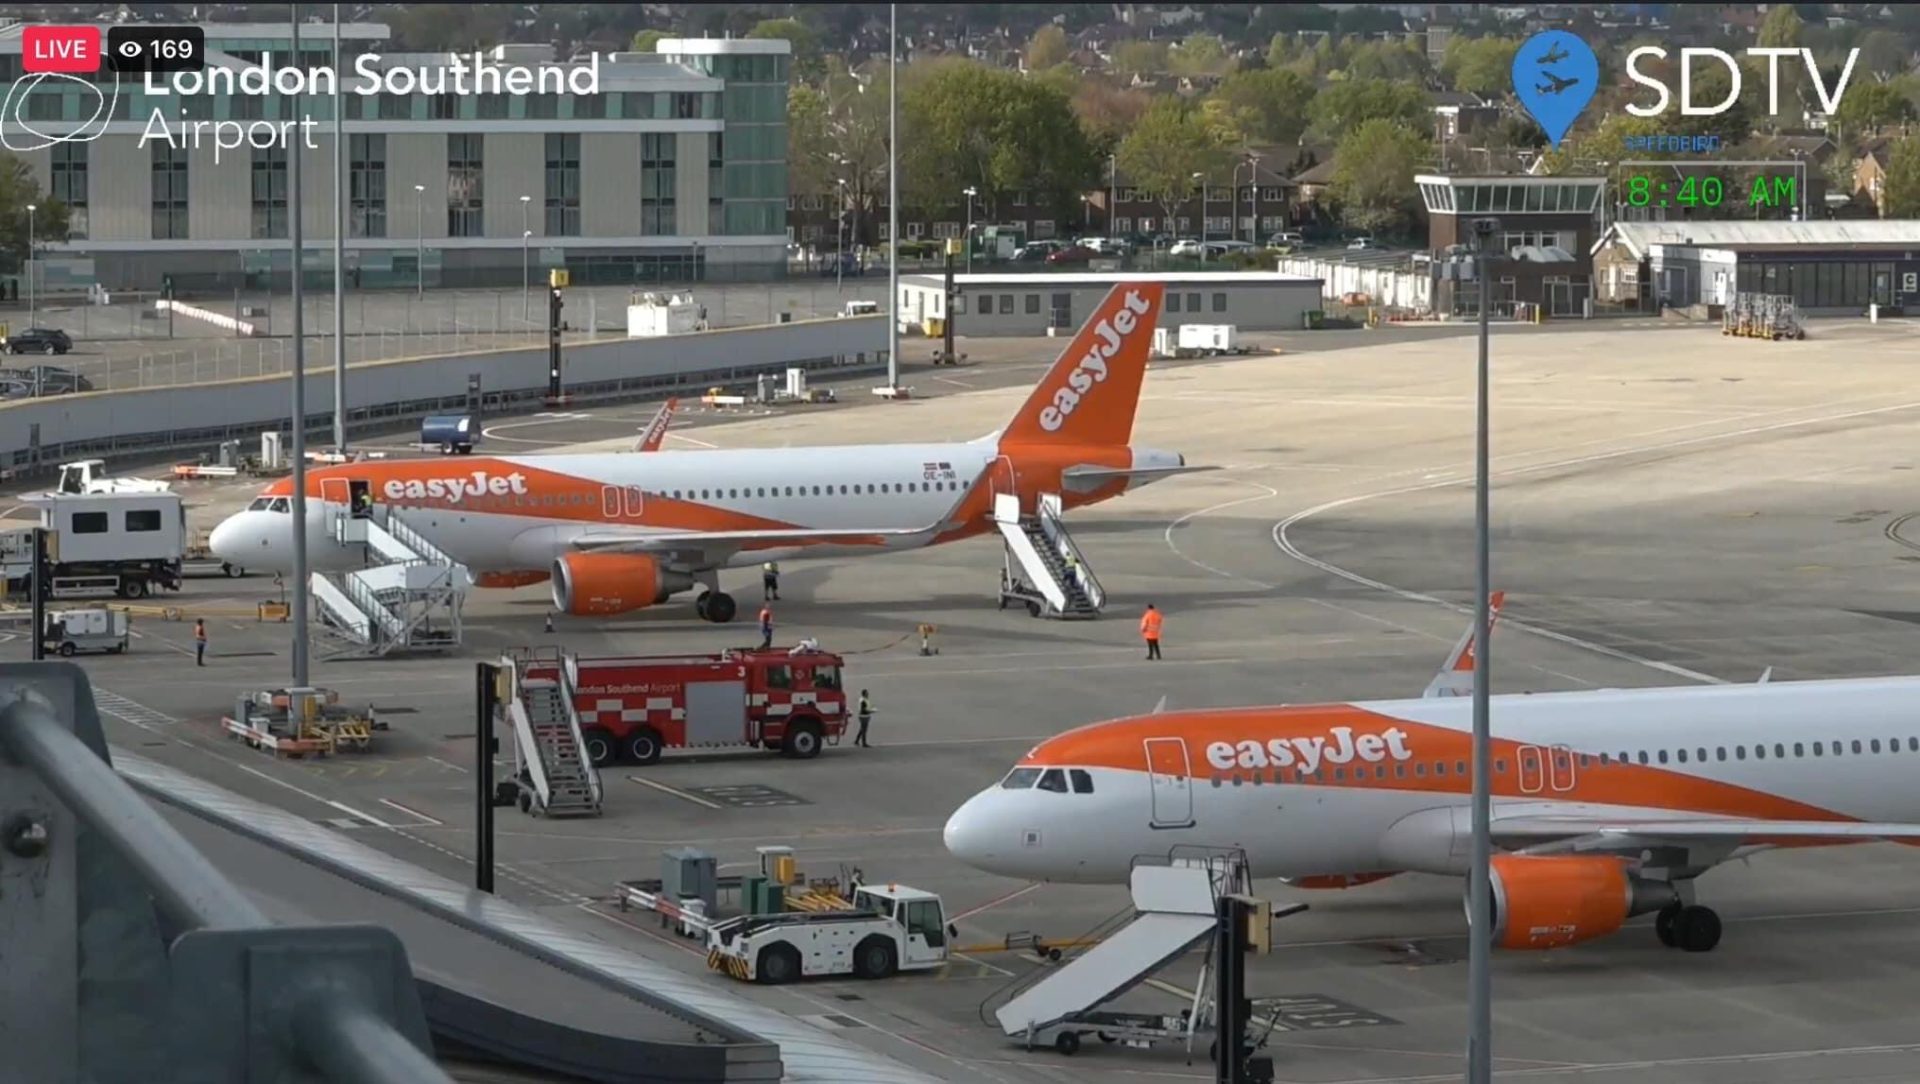 Two easyJet planes on the runway at London Southend Airport as flights to Palma de Mallorca restart